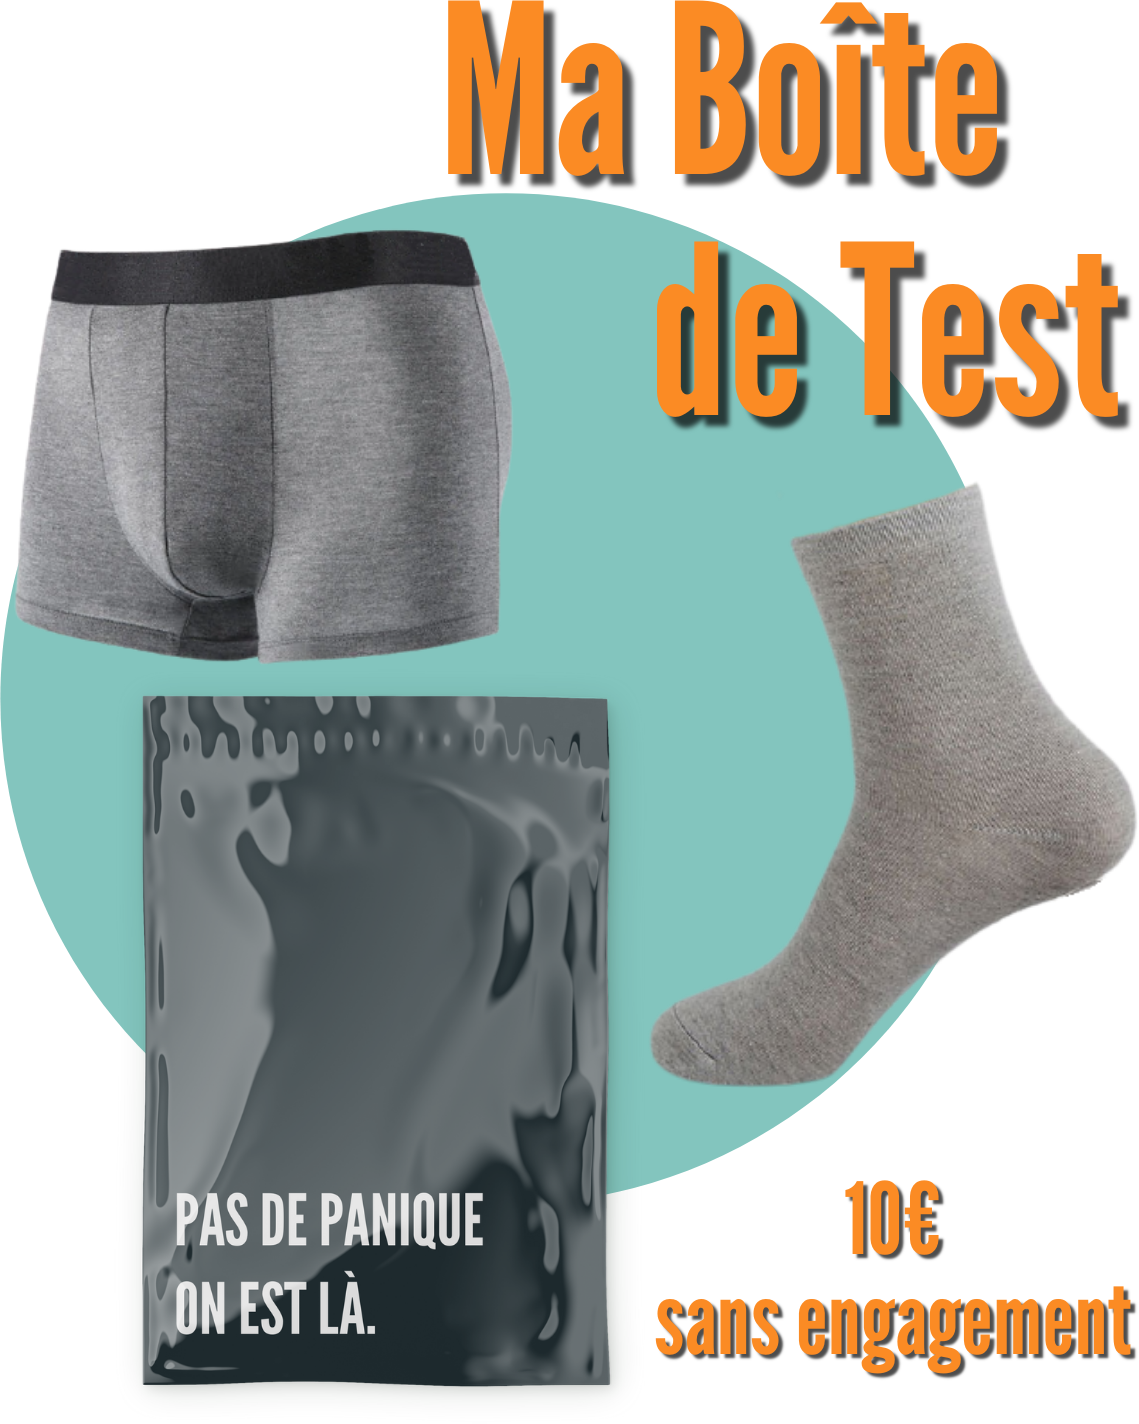 1417-boite-test.png